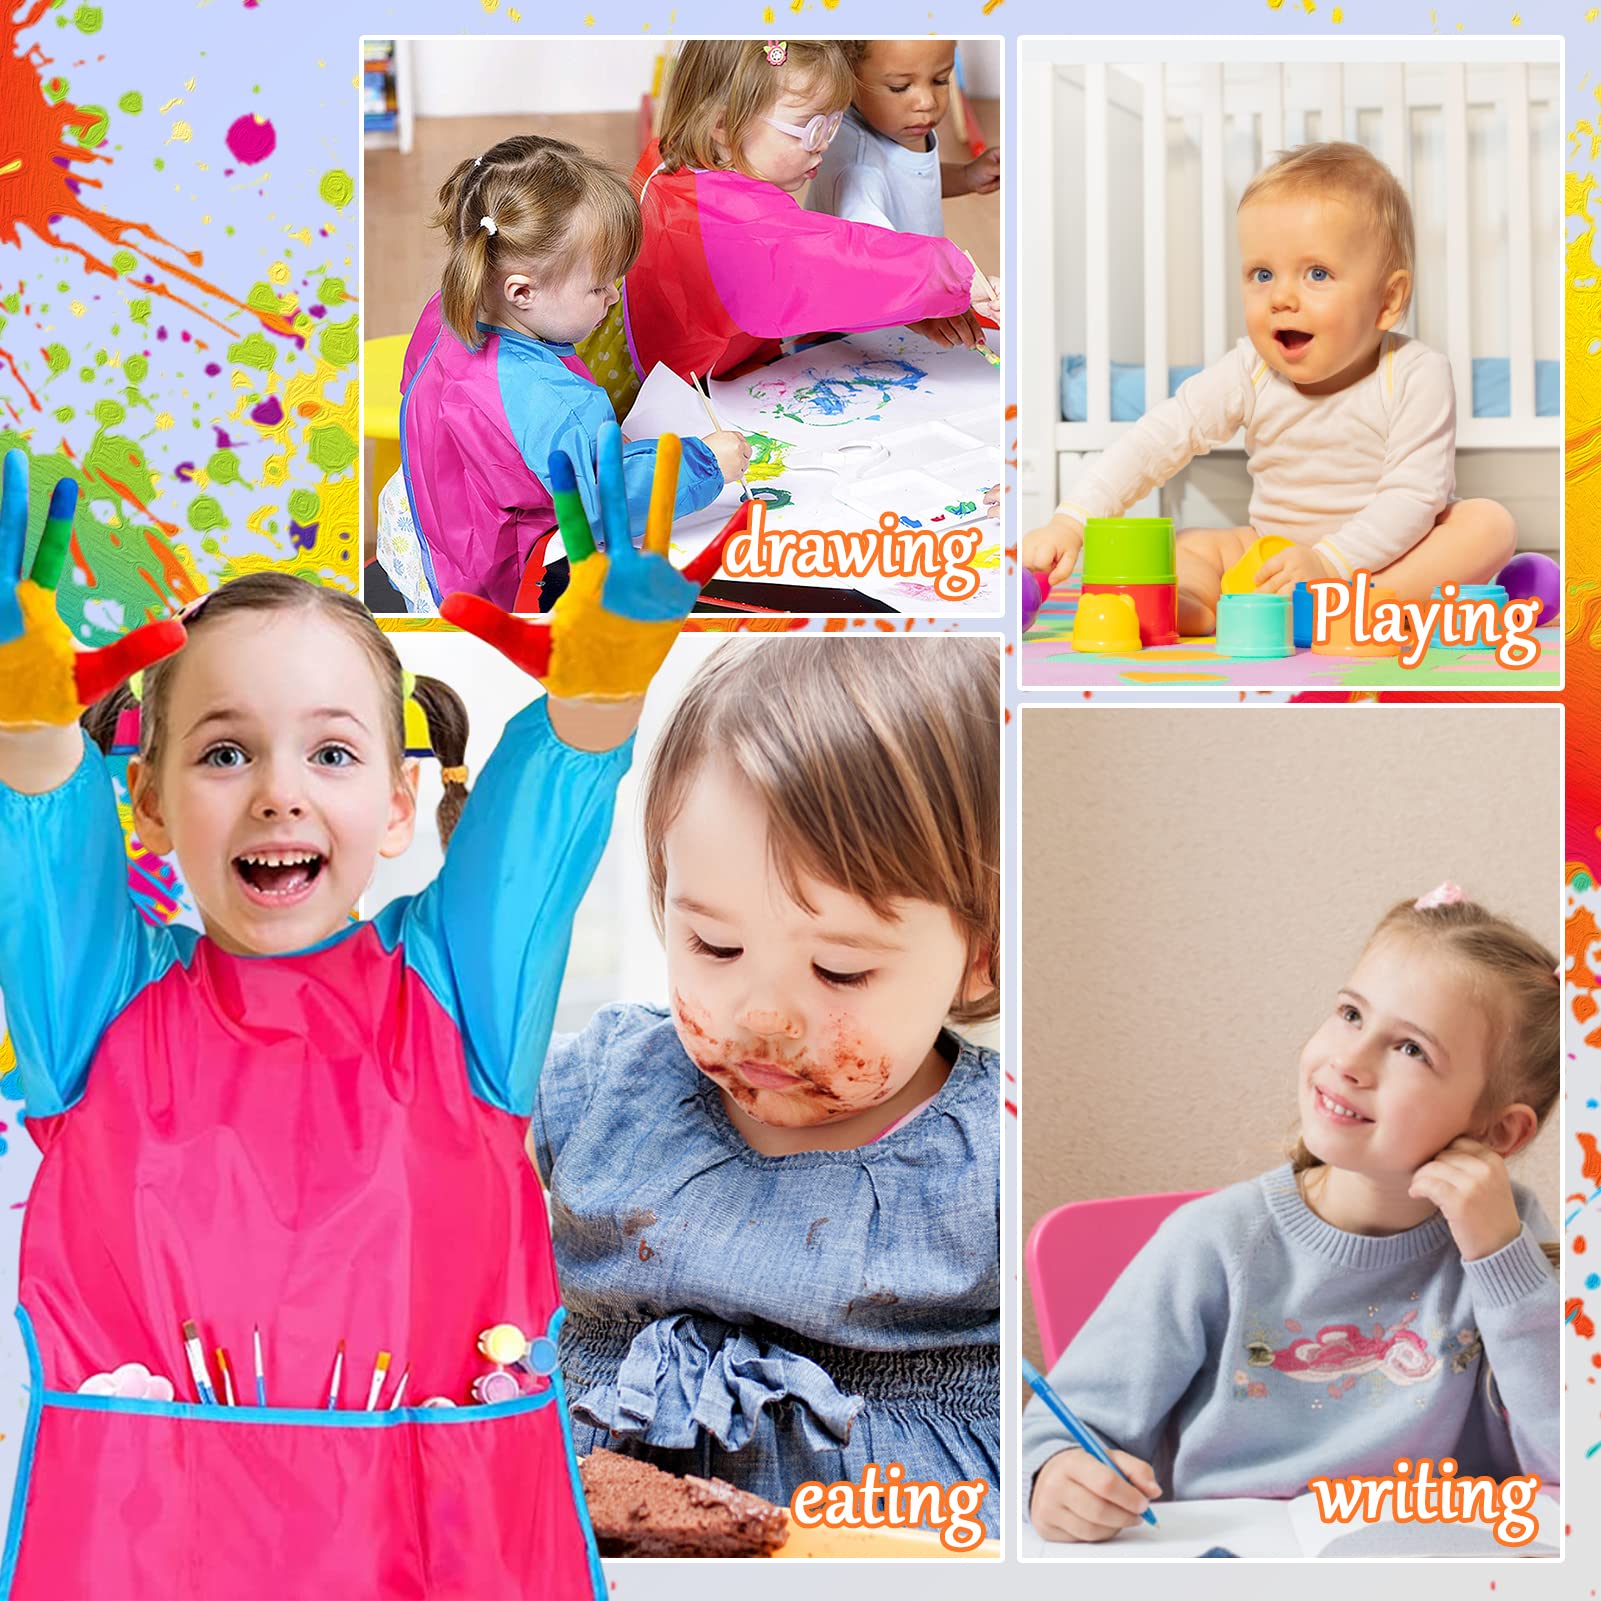 6Pcs Kids Art Smocks Toddler Smocks Waterproof Smocks for Kids Painting Colorful Children Aprons Artist Painting Smocks Long Sleeves With 3 Roomy Pockets for Kids Painting Supplies, Age 3-7 Years